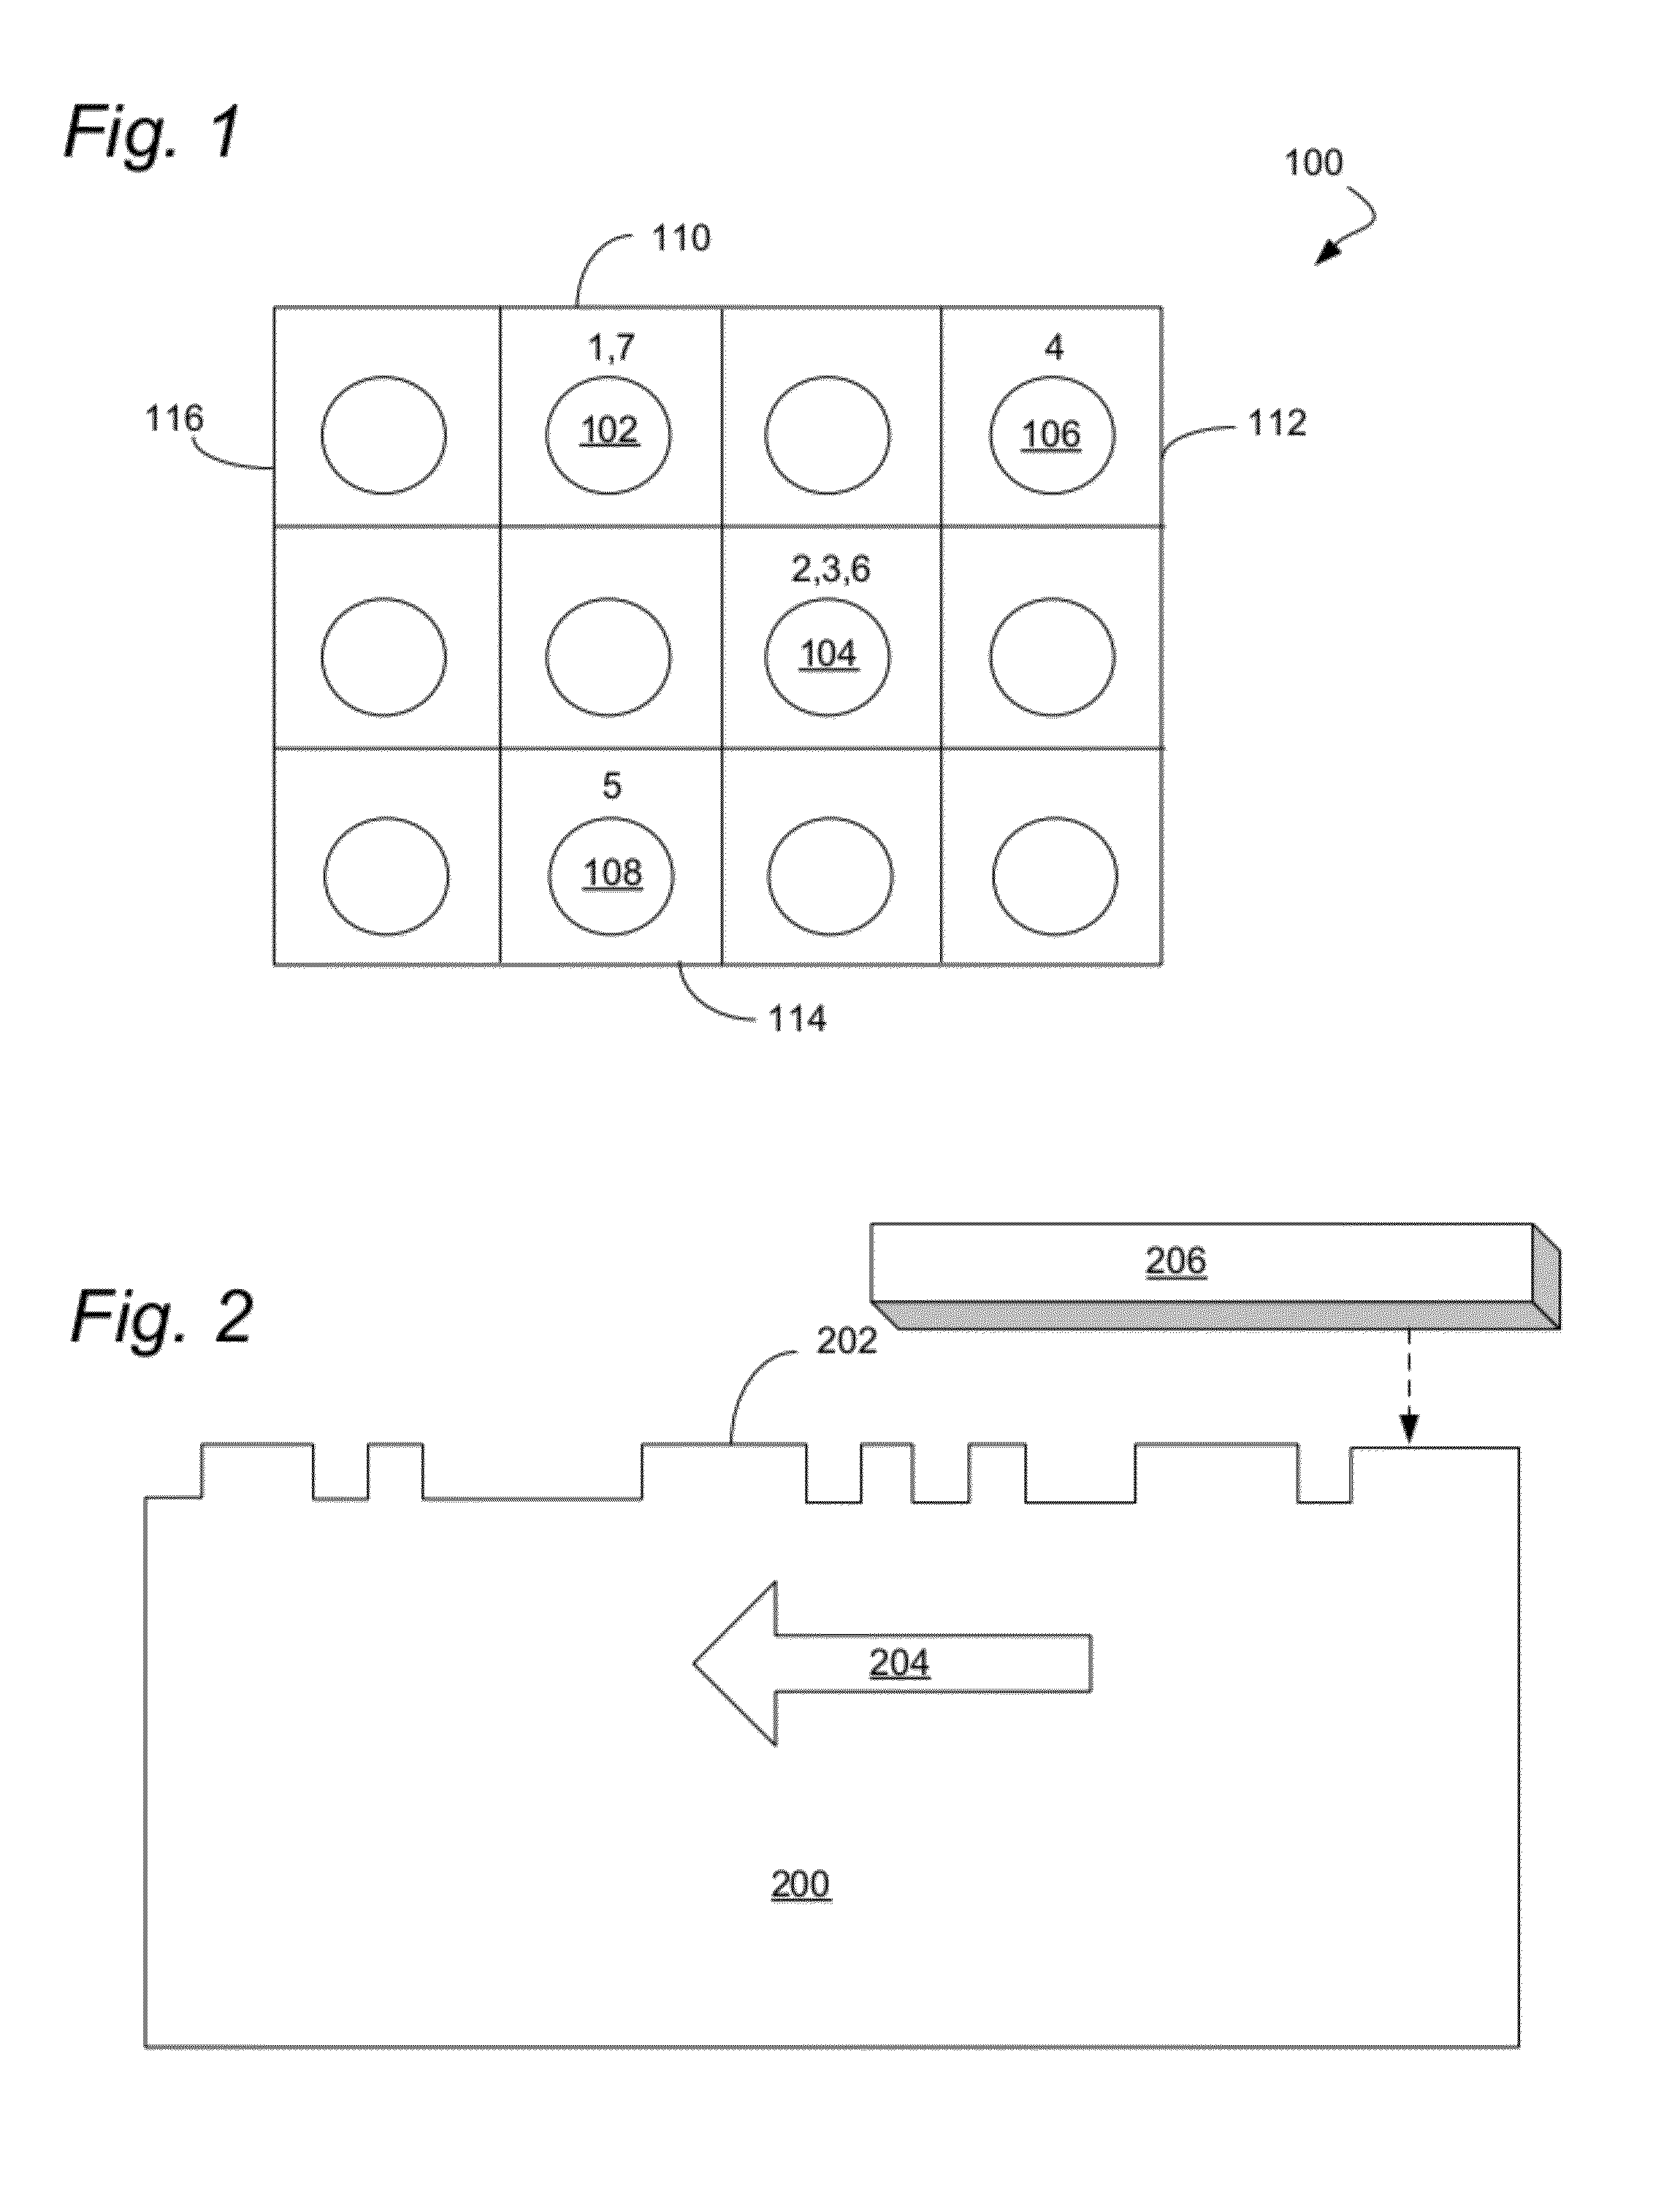 Security key entry using ancillary input device